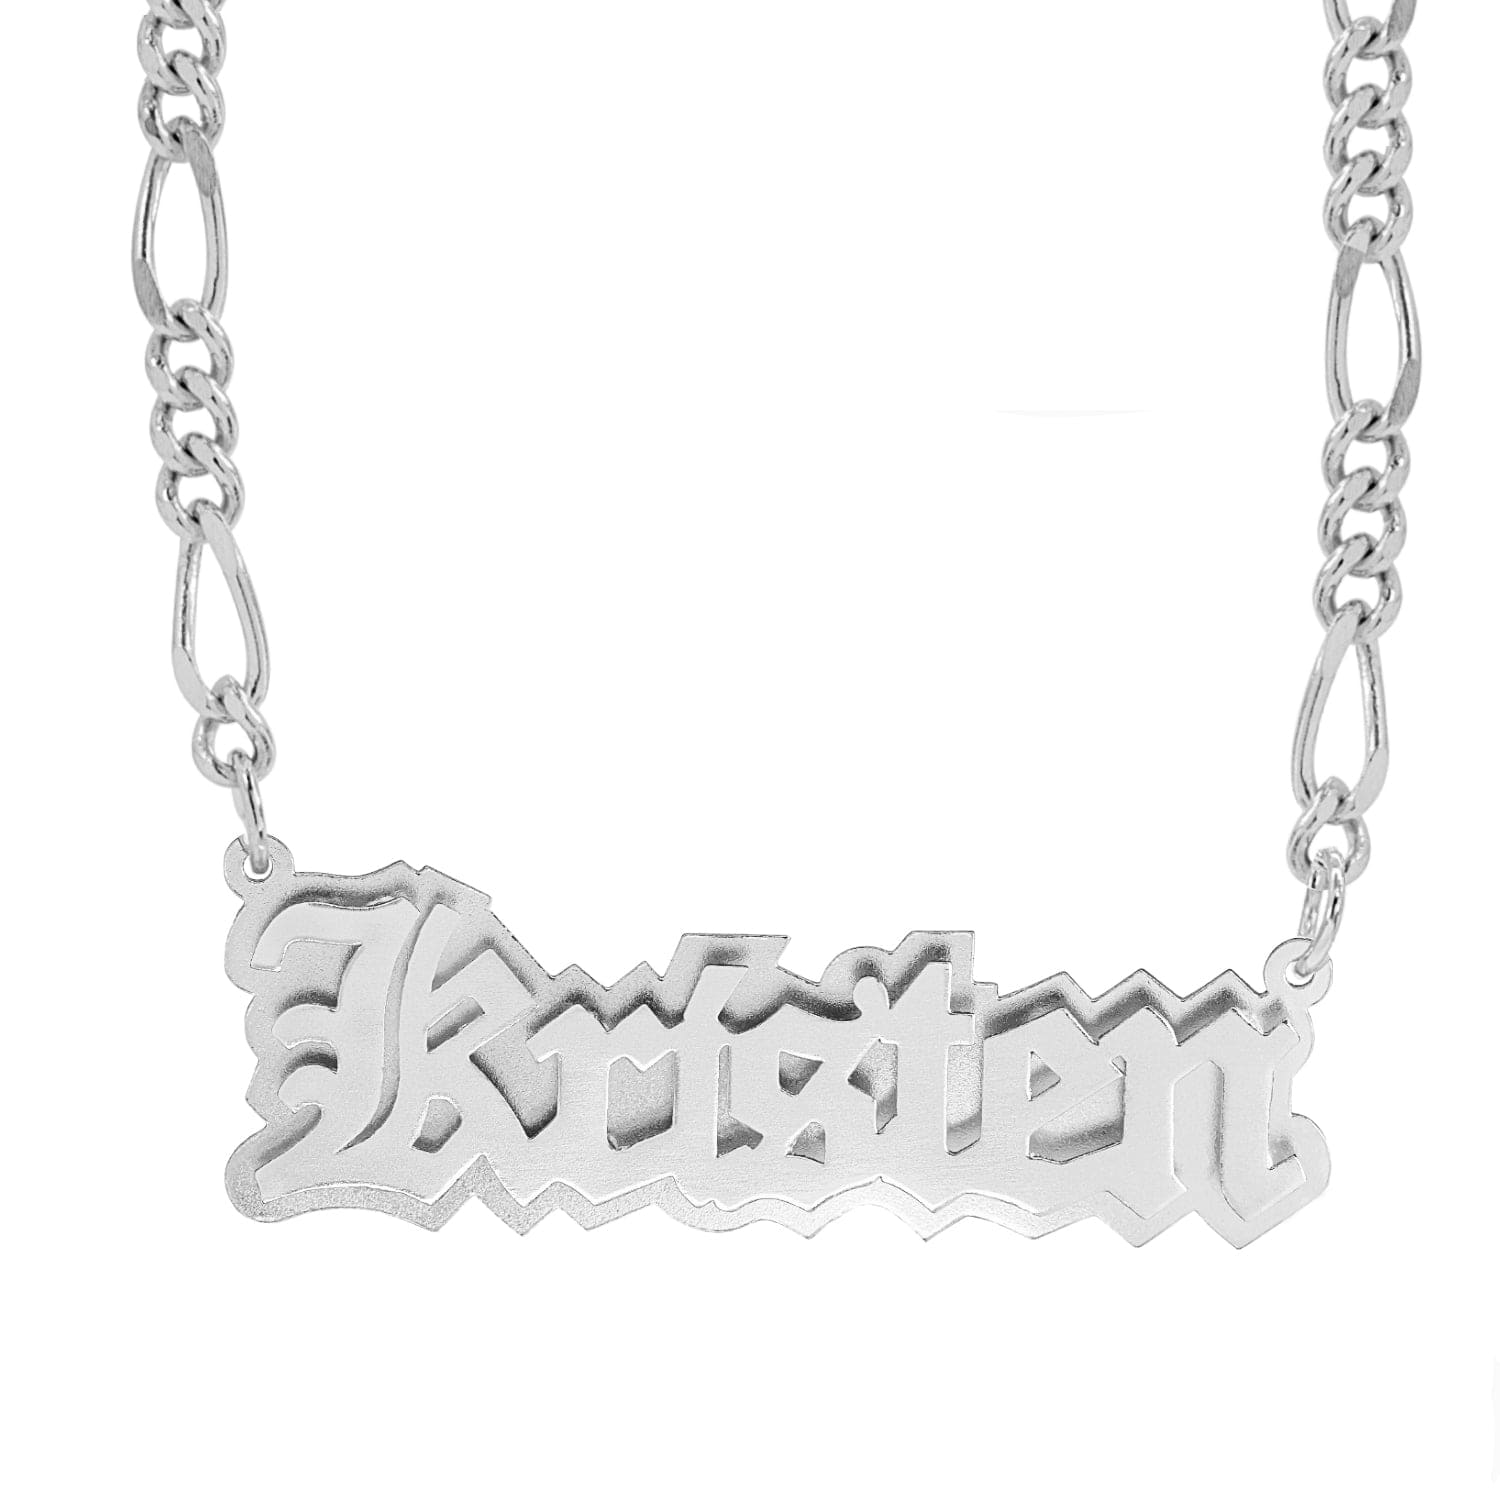 14k Gold over Sterling Silver / Figaro Chain Double Plated Nameplate Necklace "Kristen" With Figaro Chain